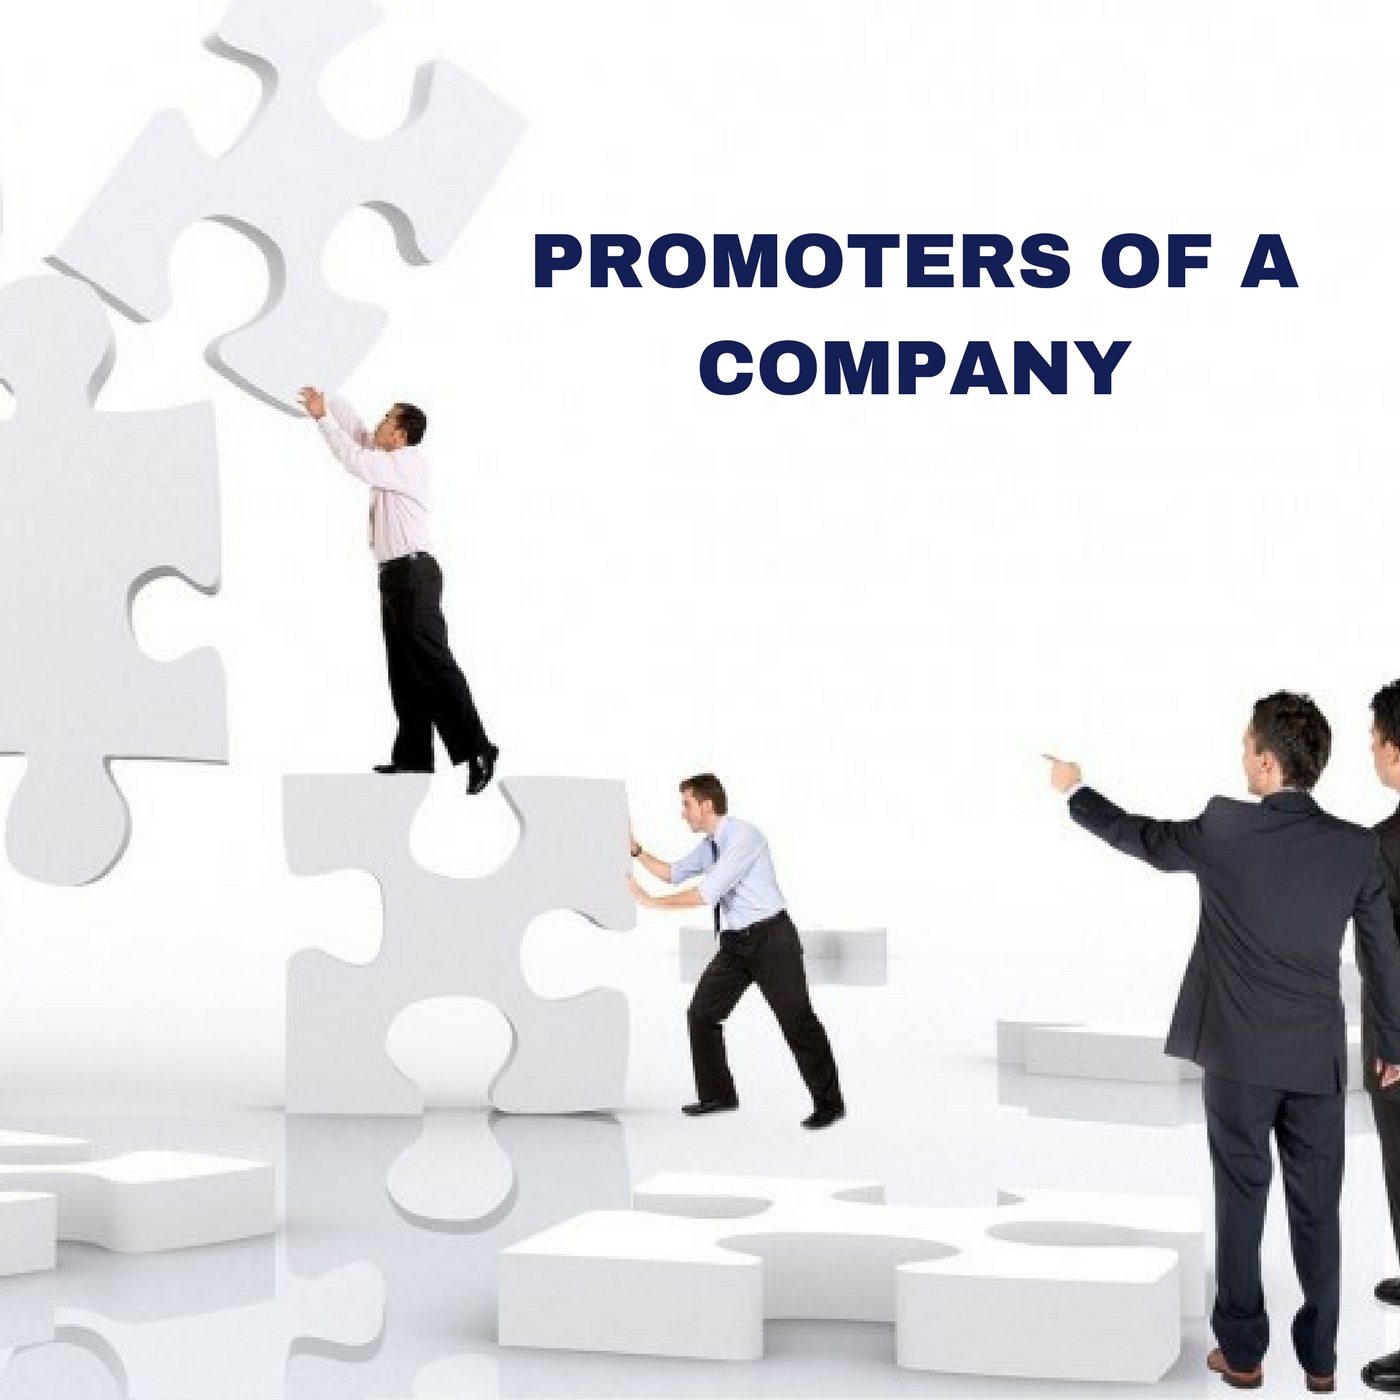 Promoters of a Company